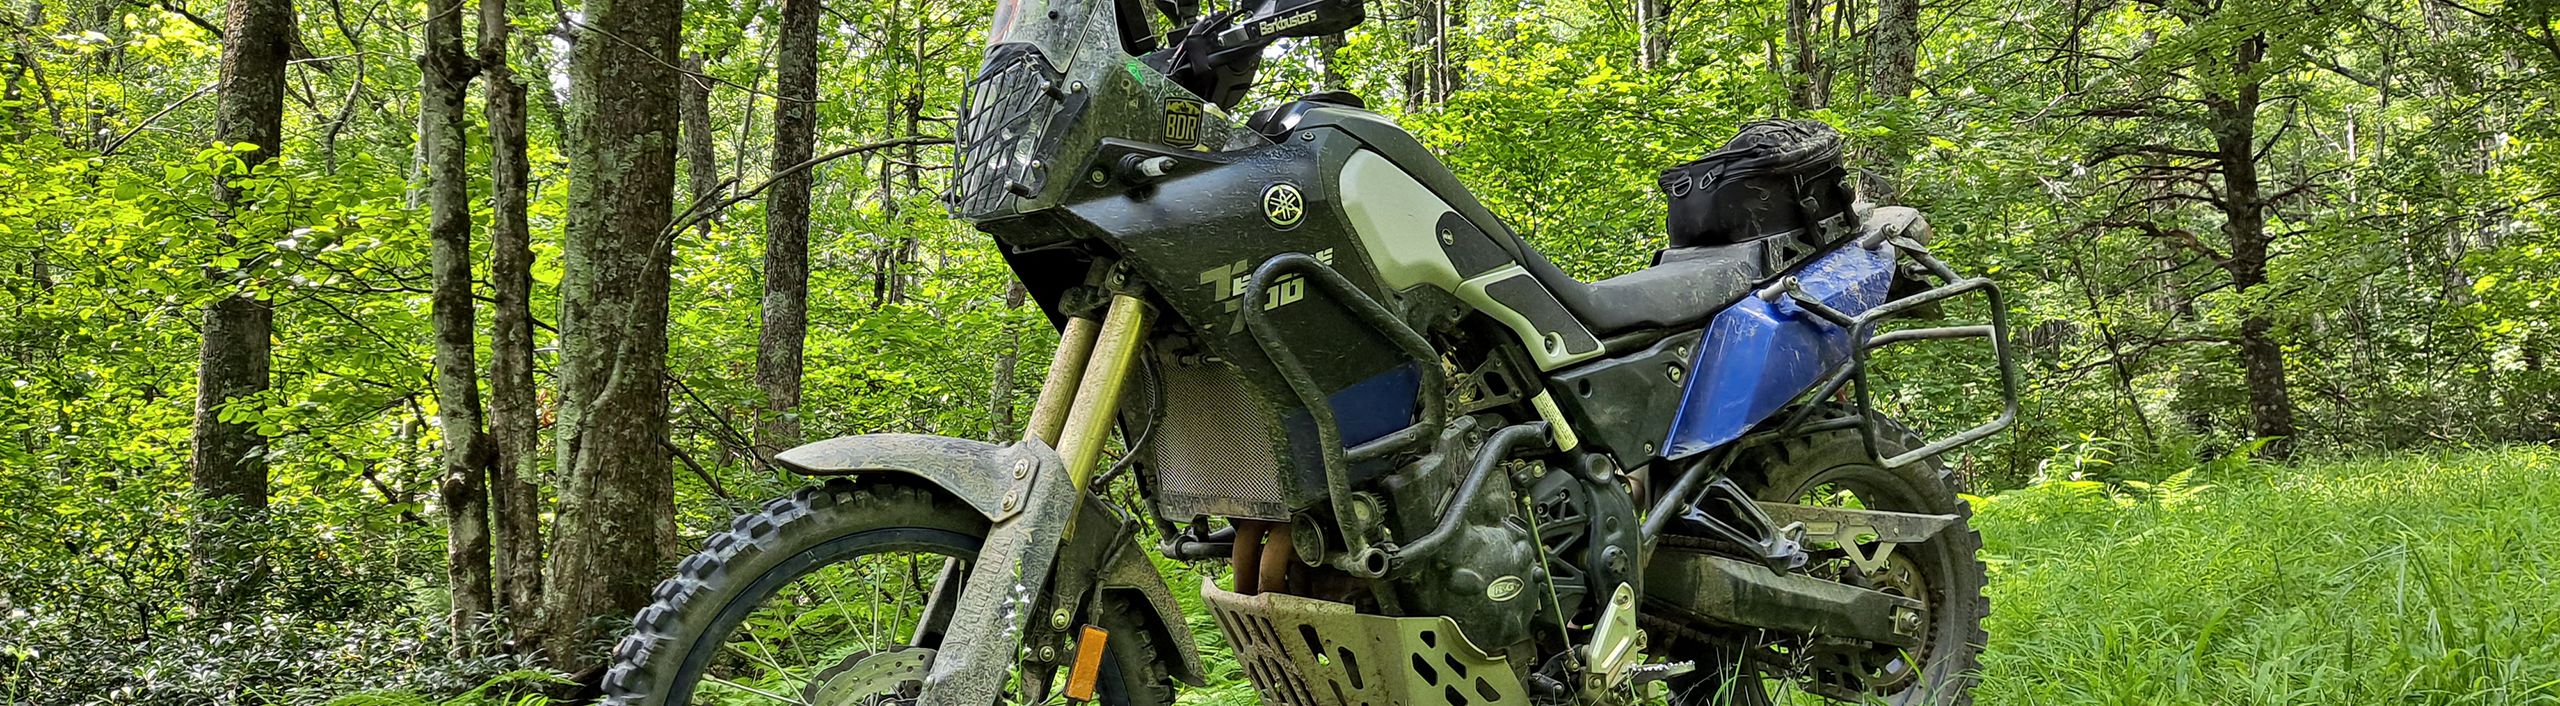 Traction: It’s Not Just for Tires-R&G Motorcycle Accessories for Improved ADV Riding